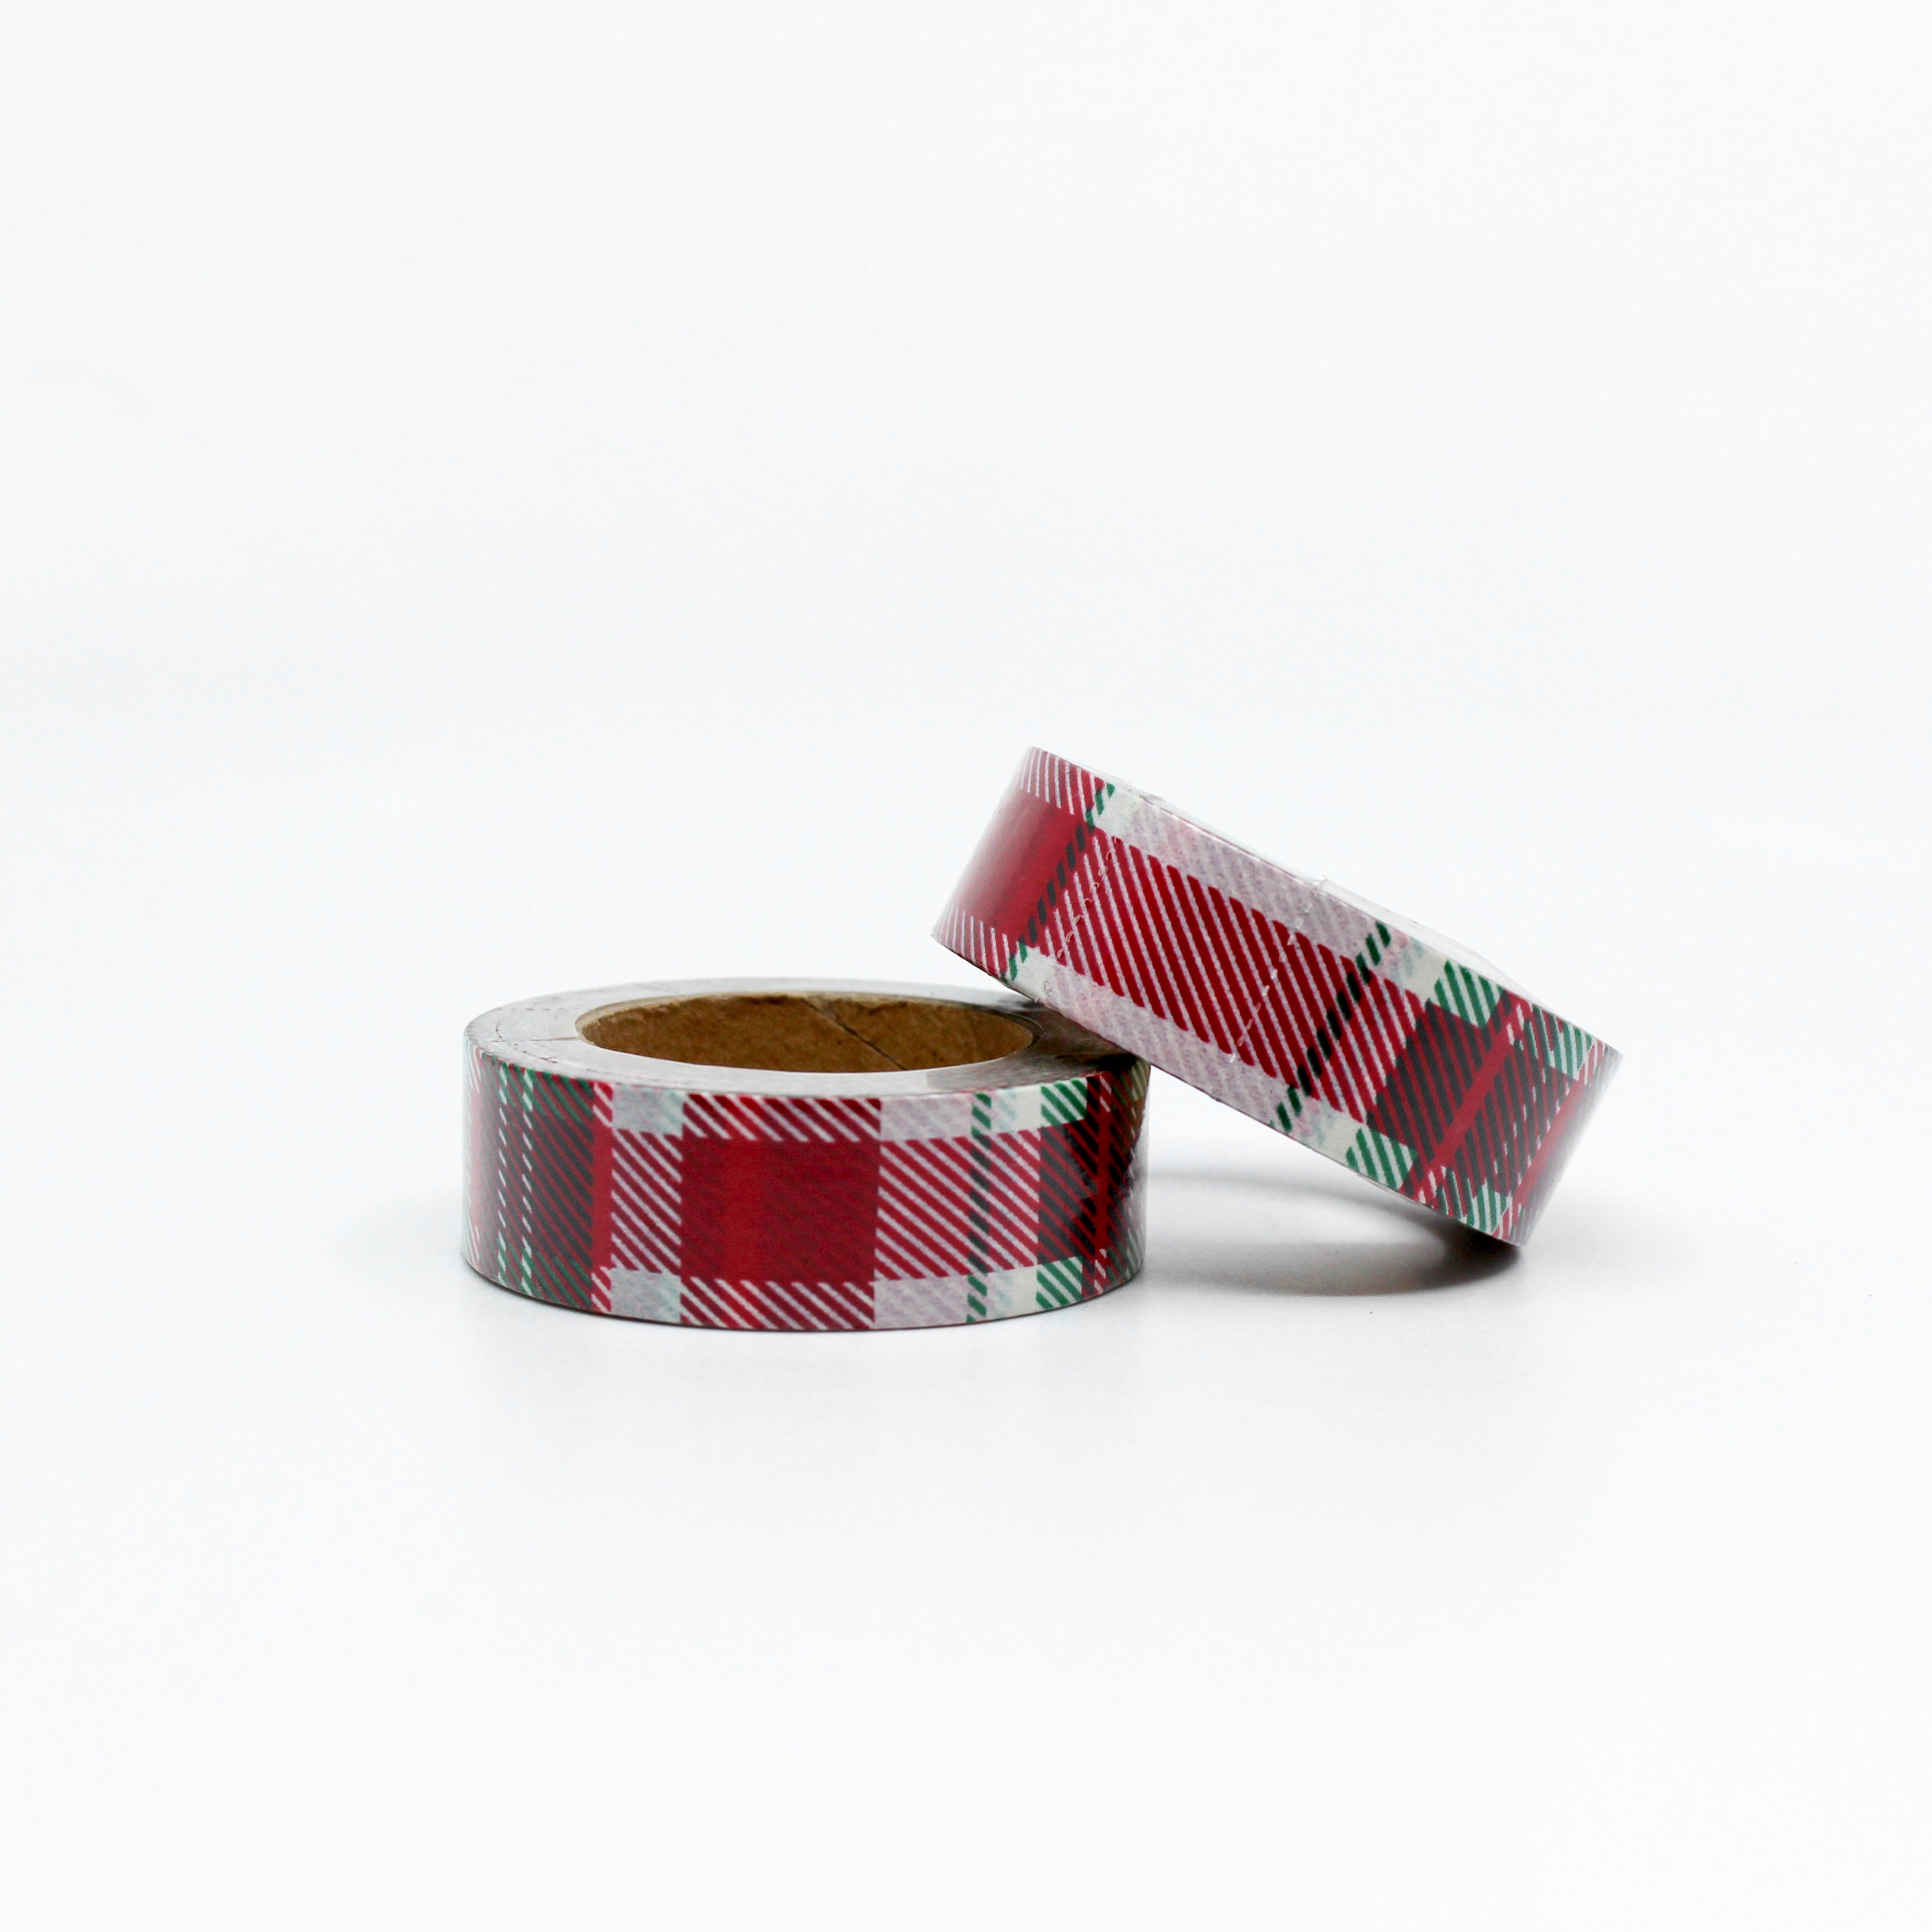 This is a cute red, green and white holiday plaid washi tapes from BBB Supplies Craft Shop